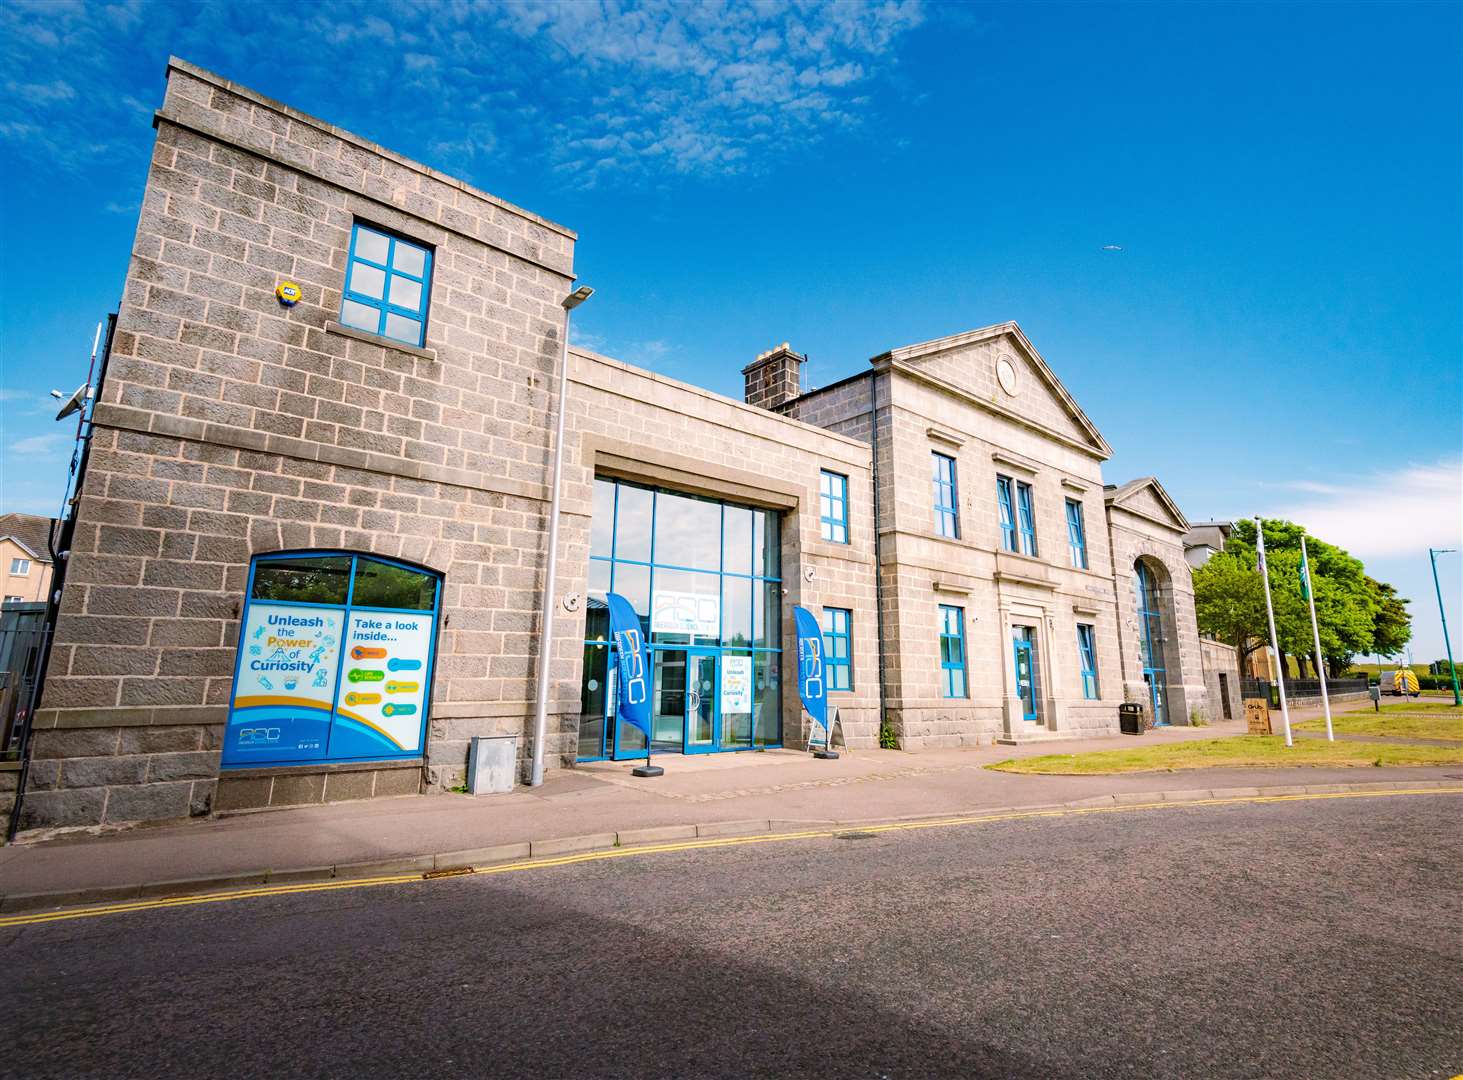 Aberdeen Science Centre offers an exciting day out for all ages.